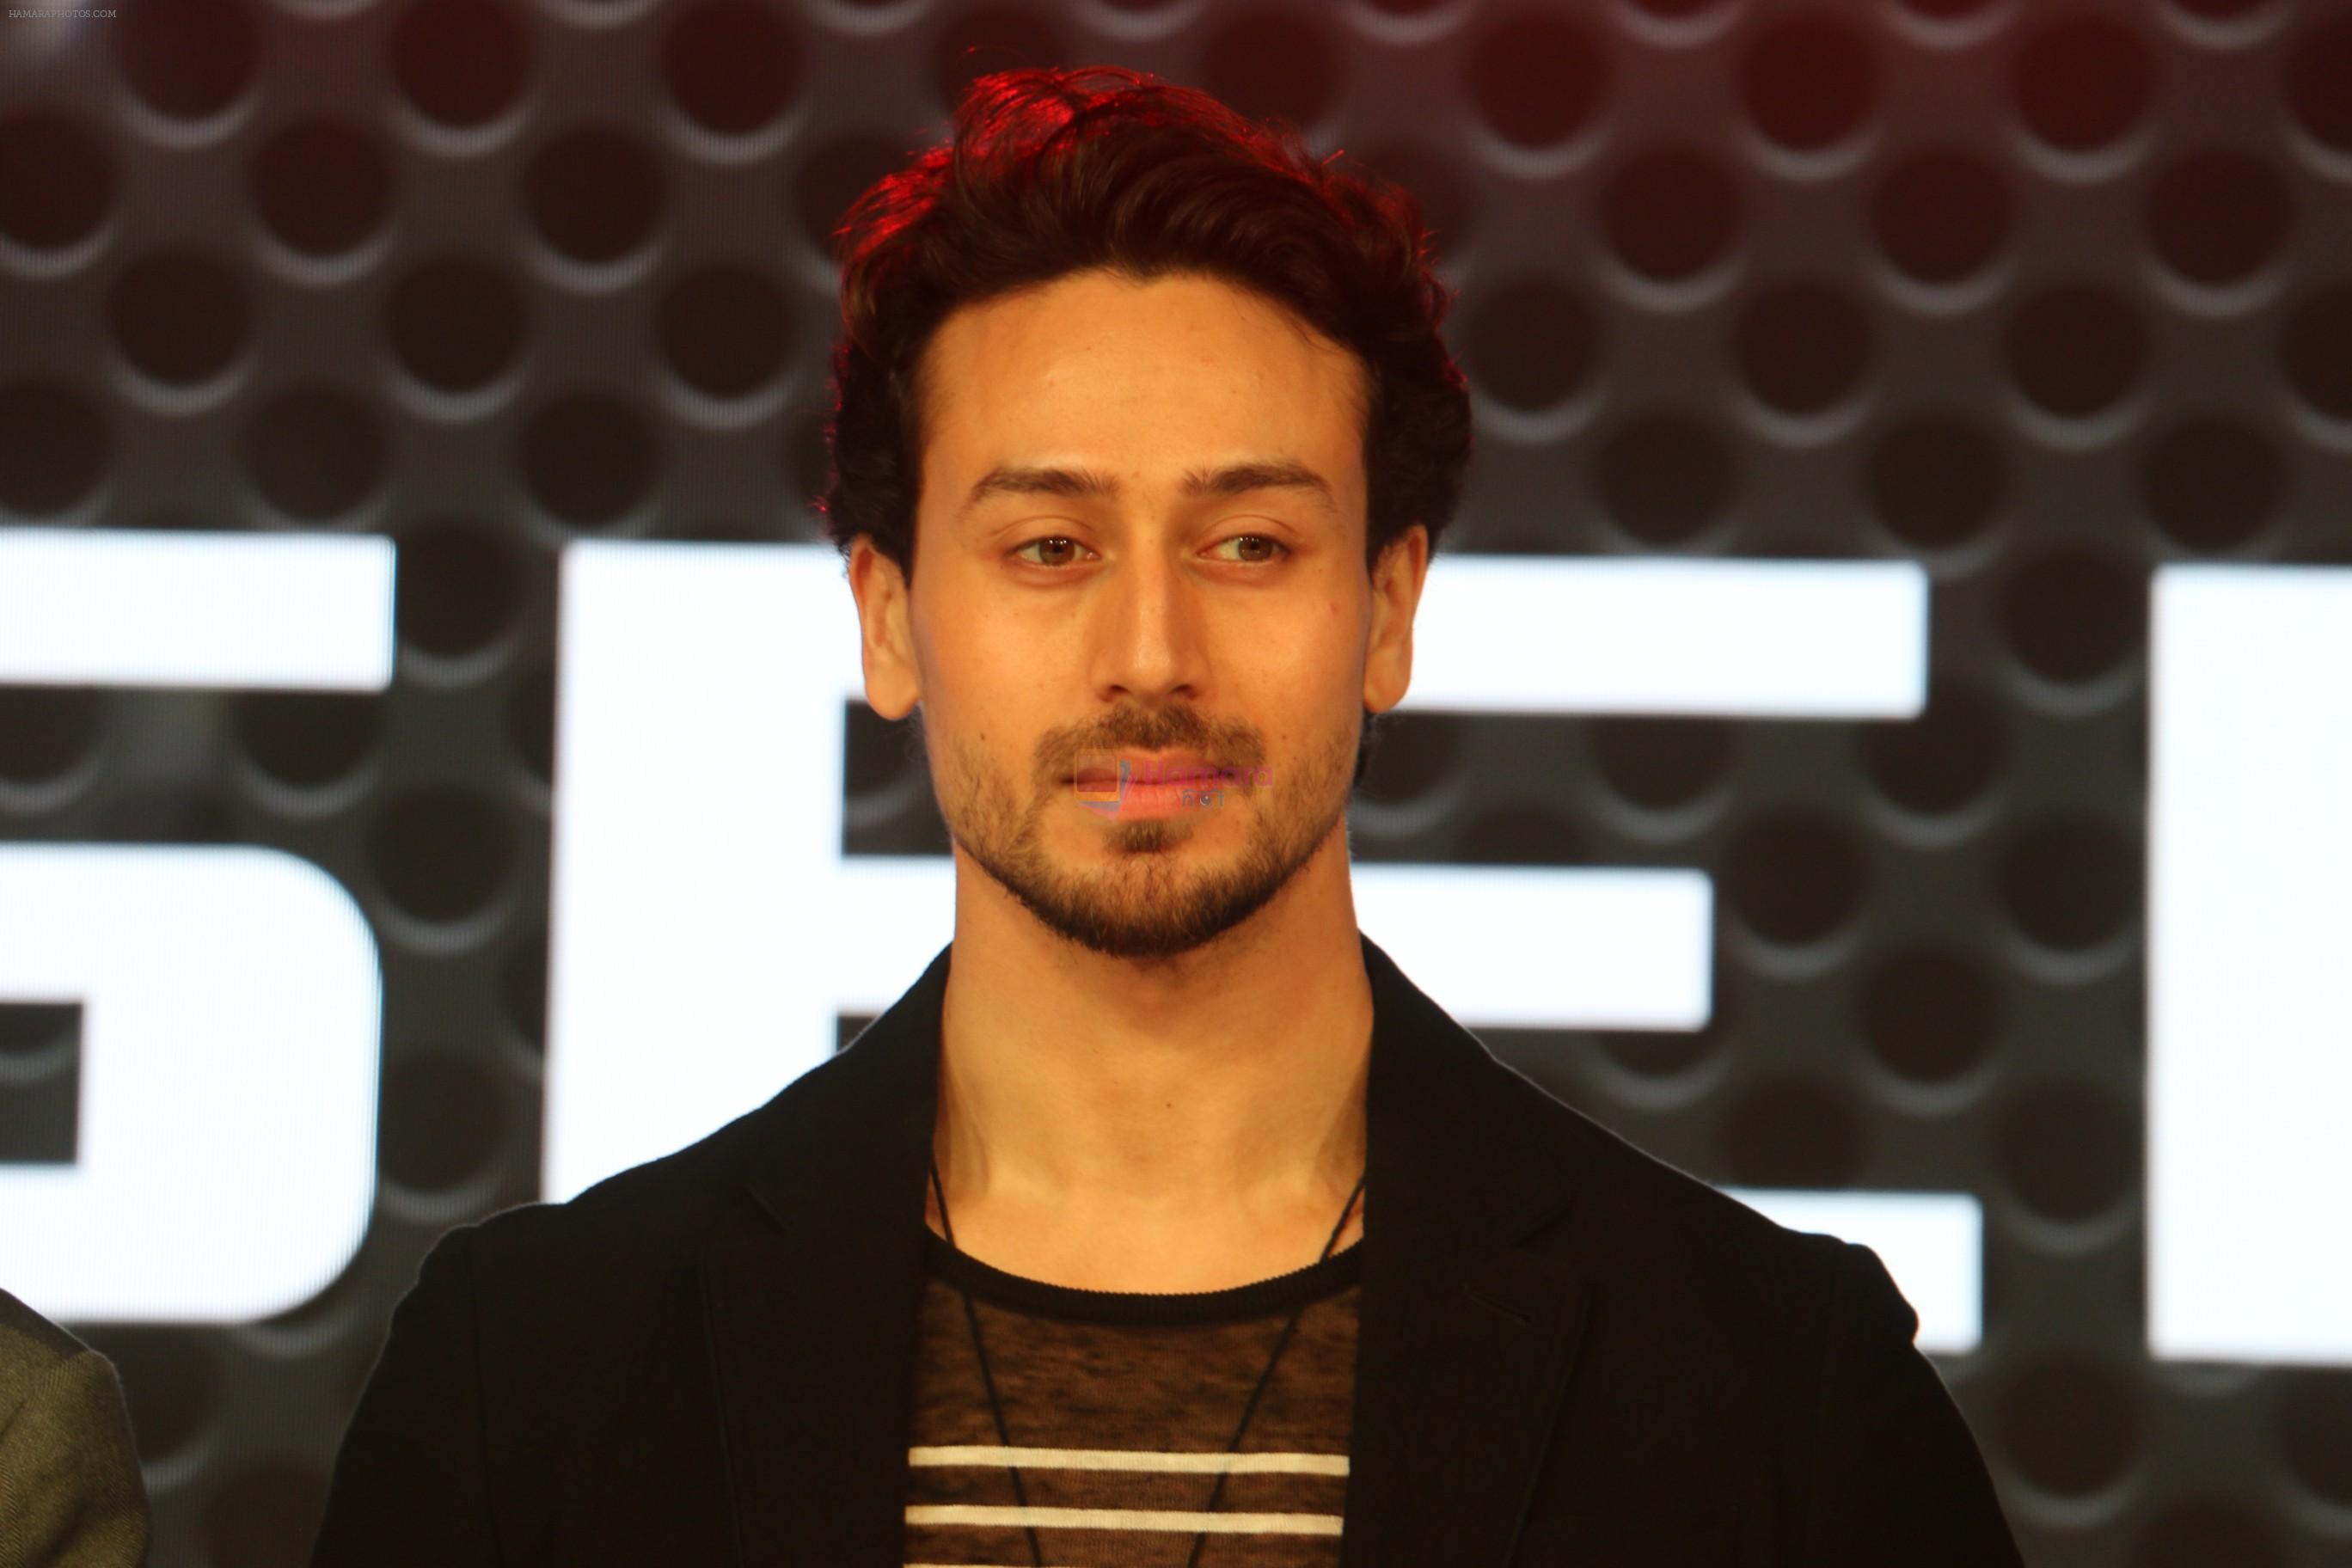 Tiger Shroff at the launch of Kia Seltos in jw marriott juhu on 22nd Aug 2019